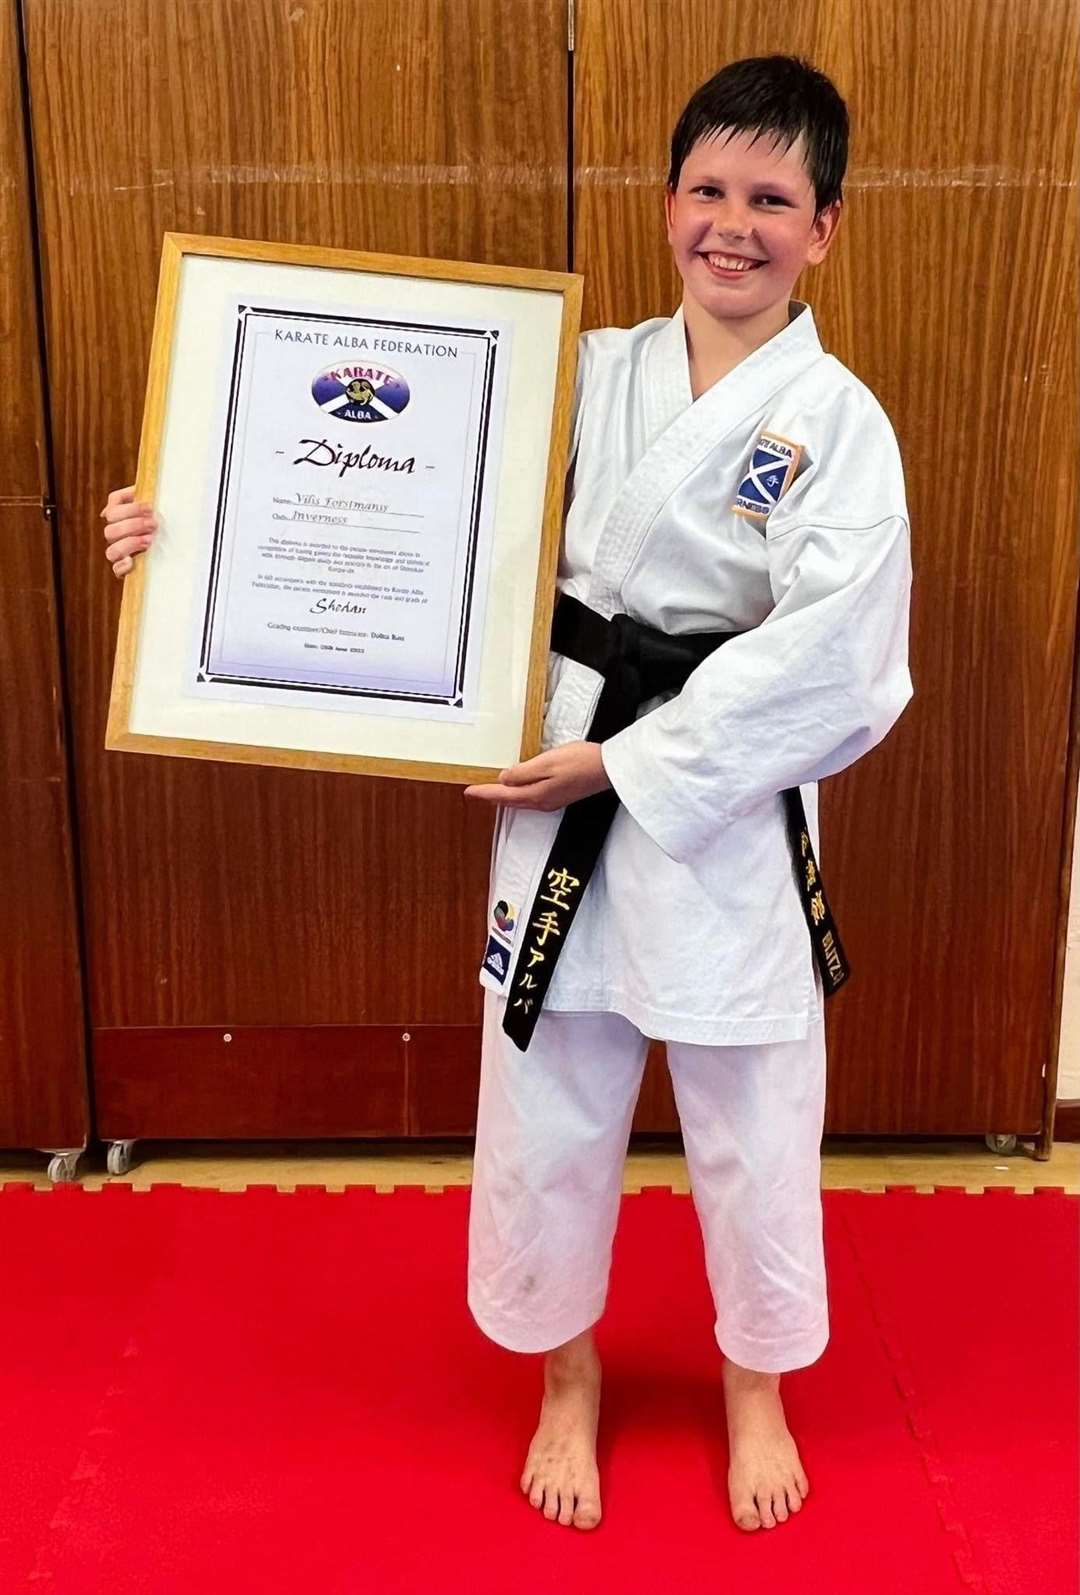 Vilis Forstmanis was accomplished in karate before his cancer diagnosis – and he shows no signs of stopping even after.